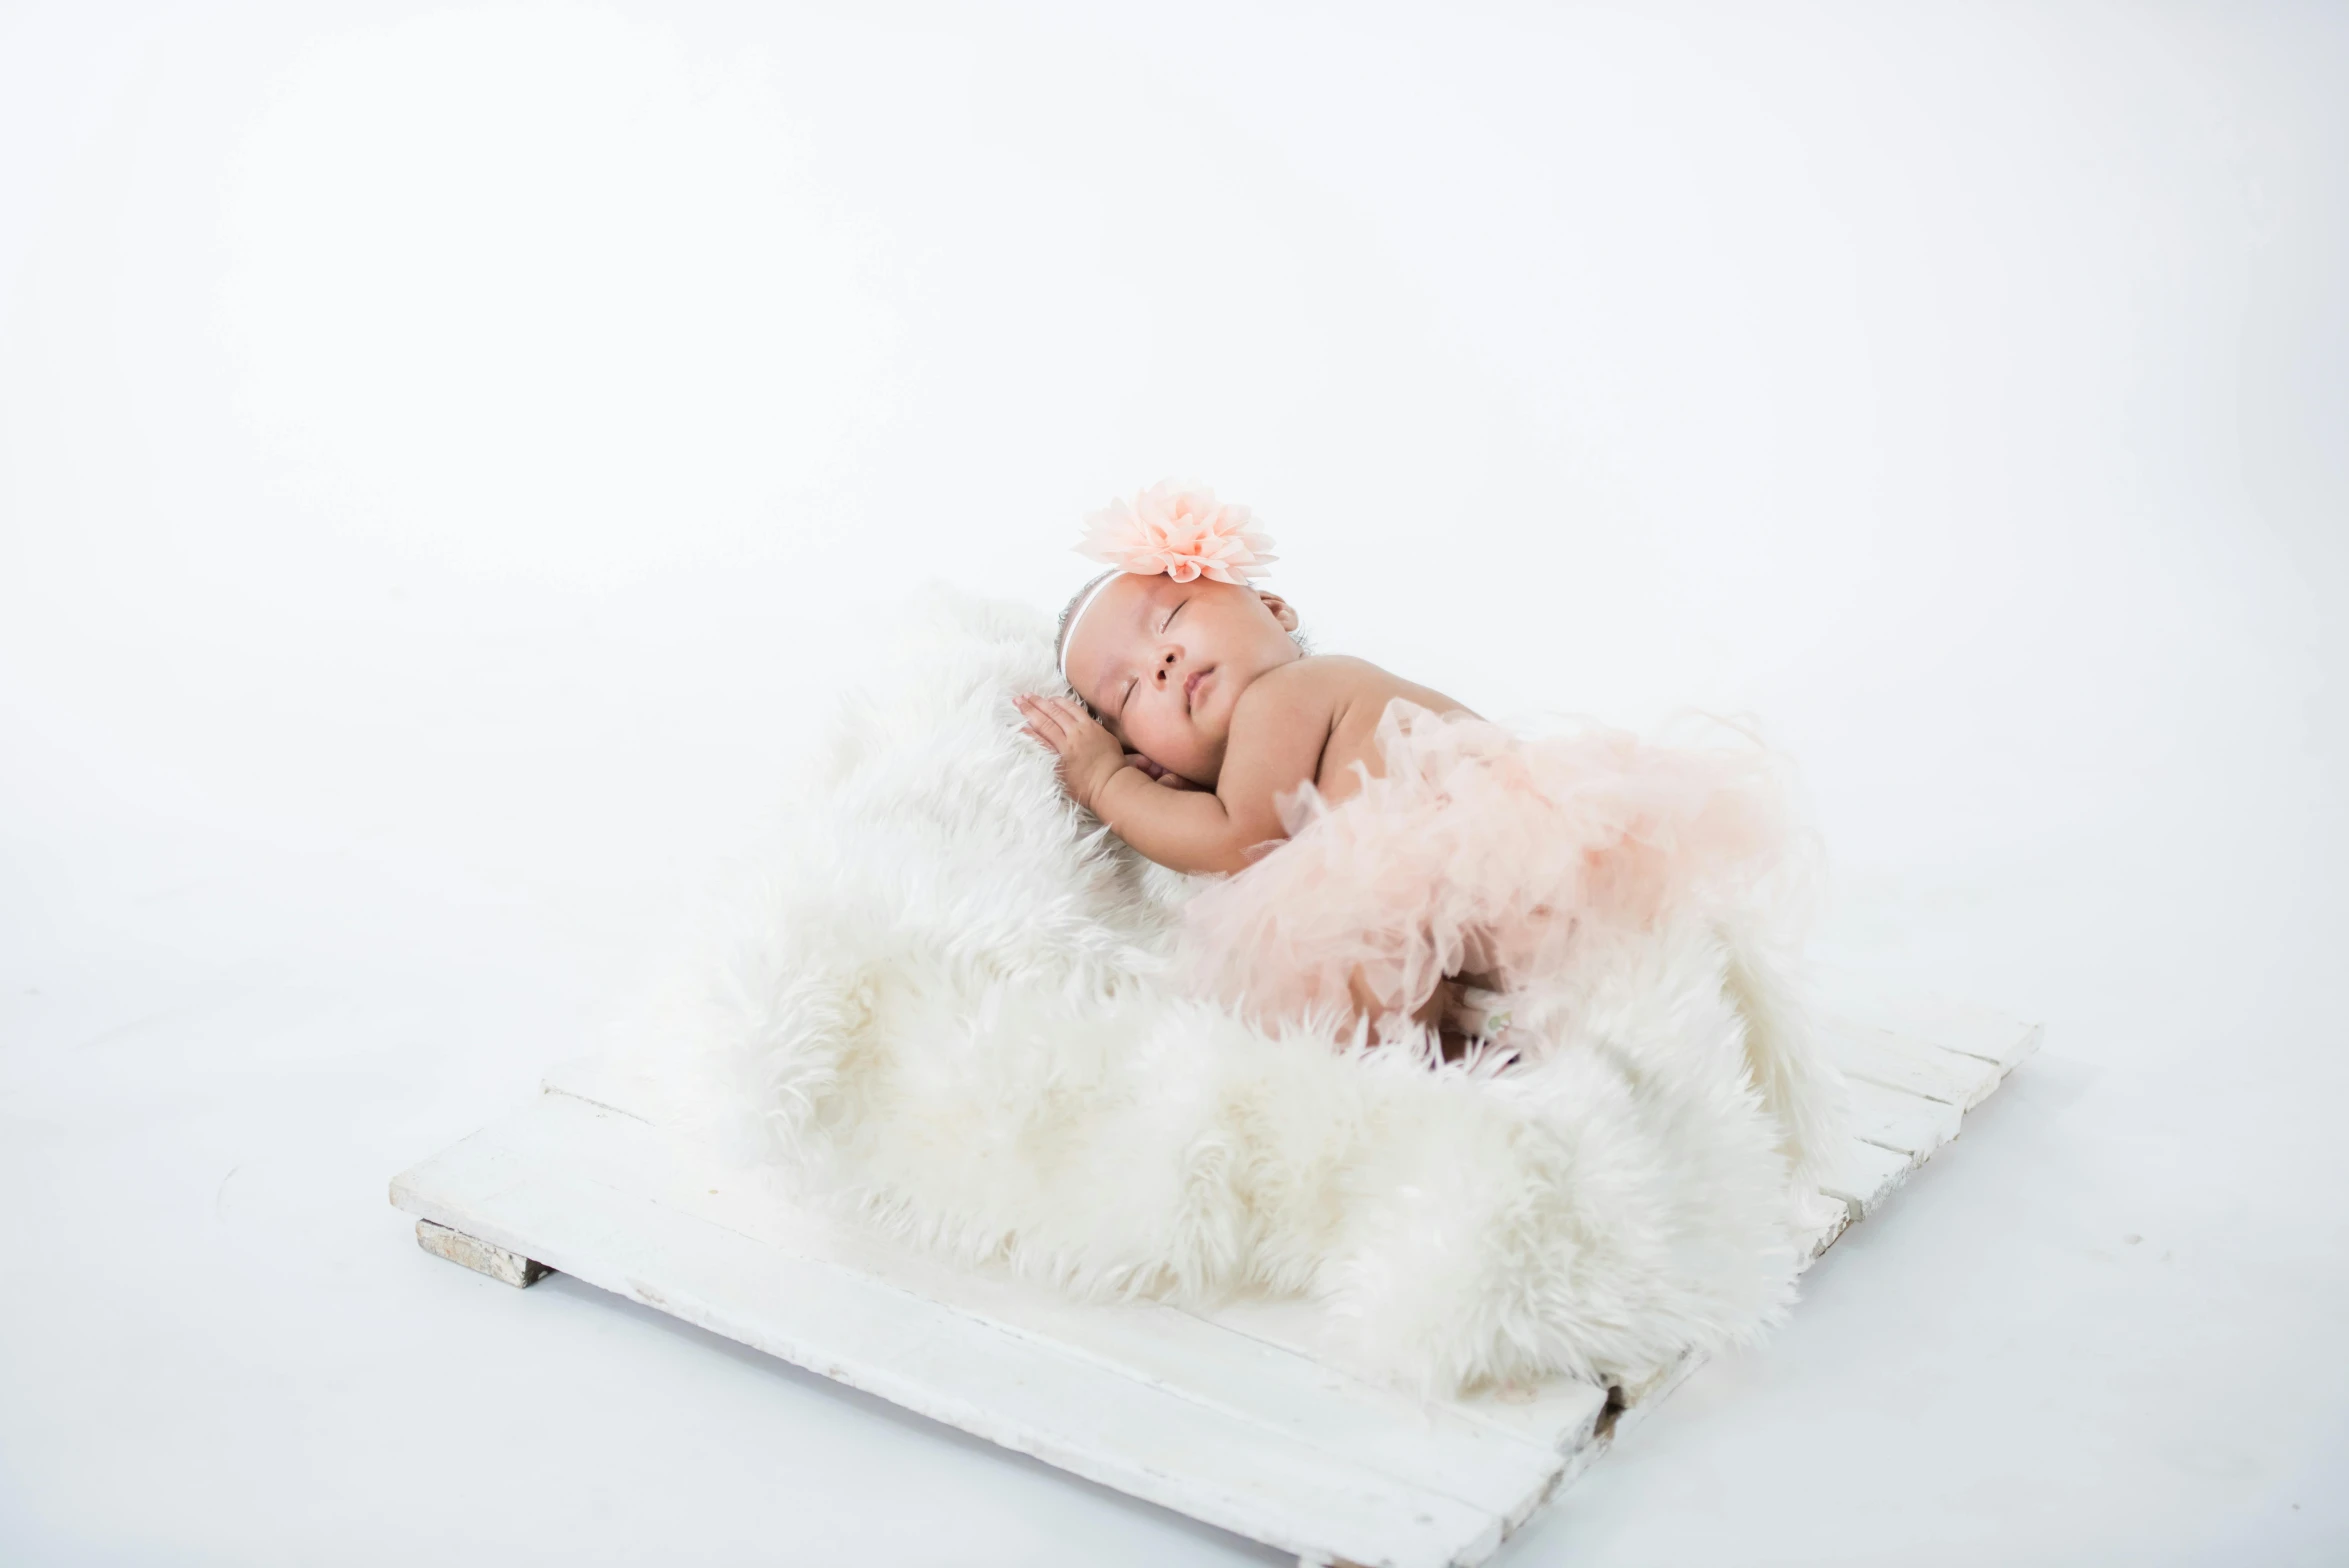 a baby sleeping on top of a white blanket, an album cover, by Will Ellis, shutterstock contest winner, pink tutu, full body photoshoot, soft feather, small